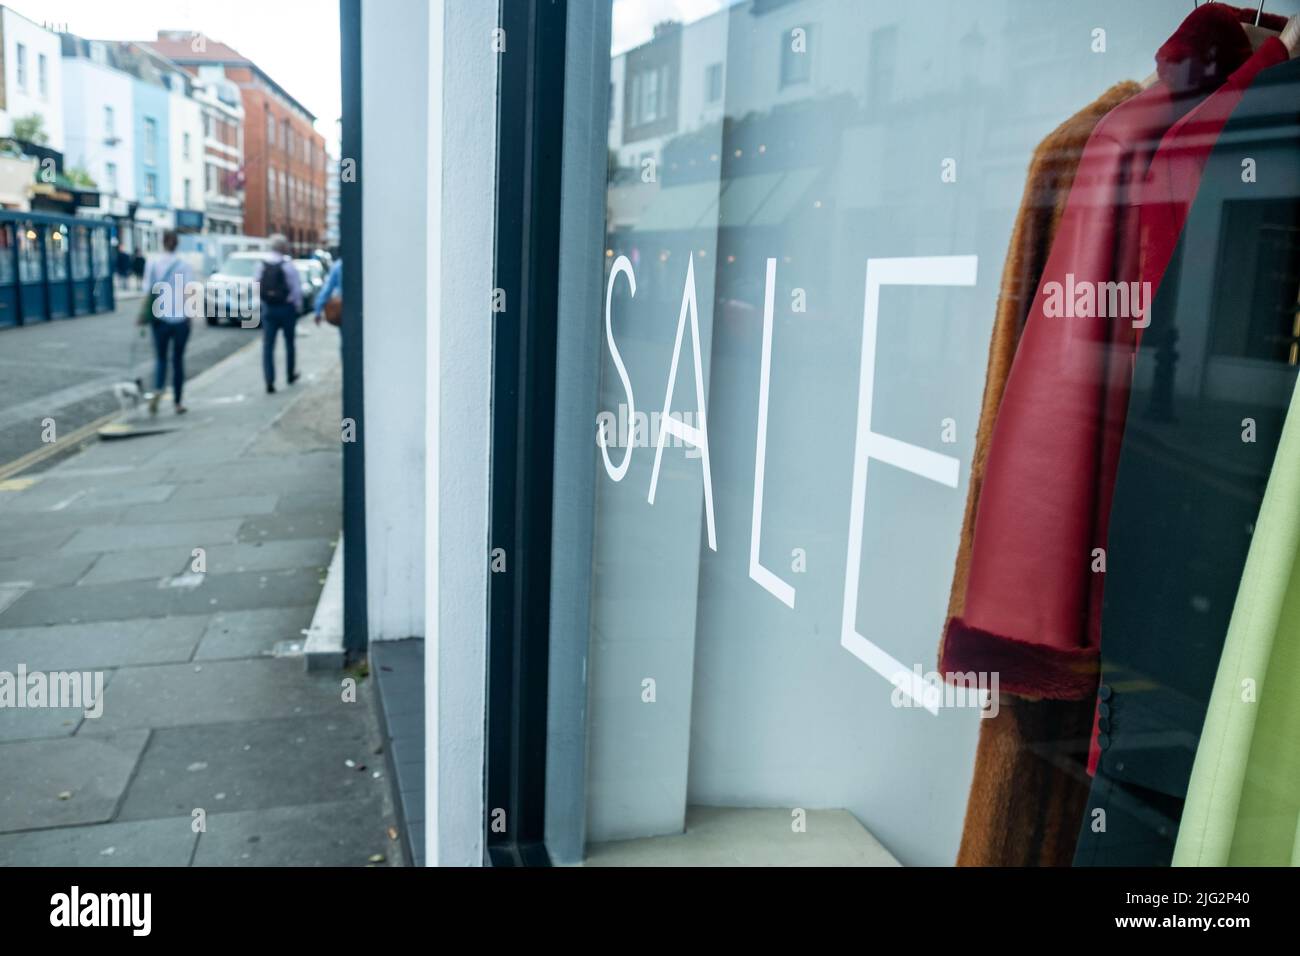 High Street clothes store with ‘Sale’ text in shop window Stock Photo